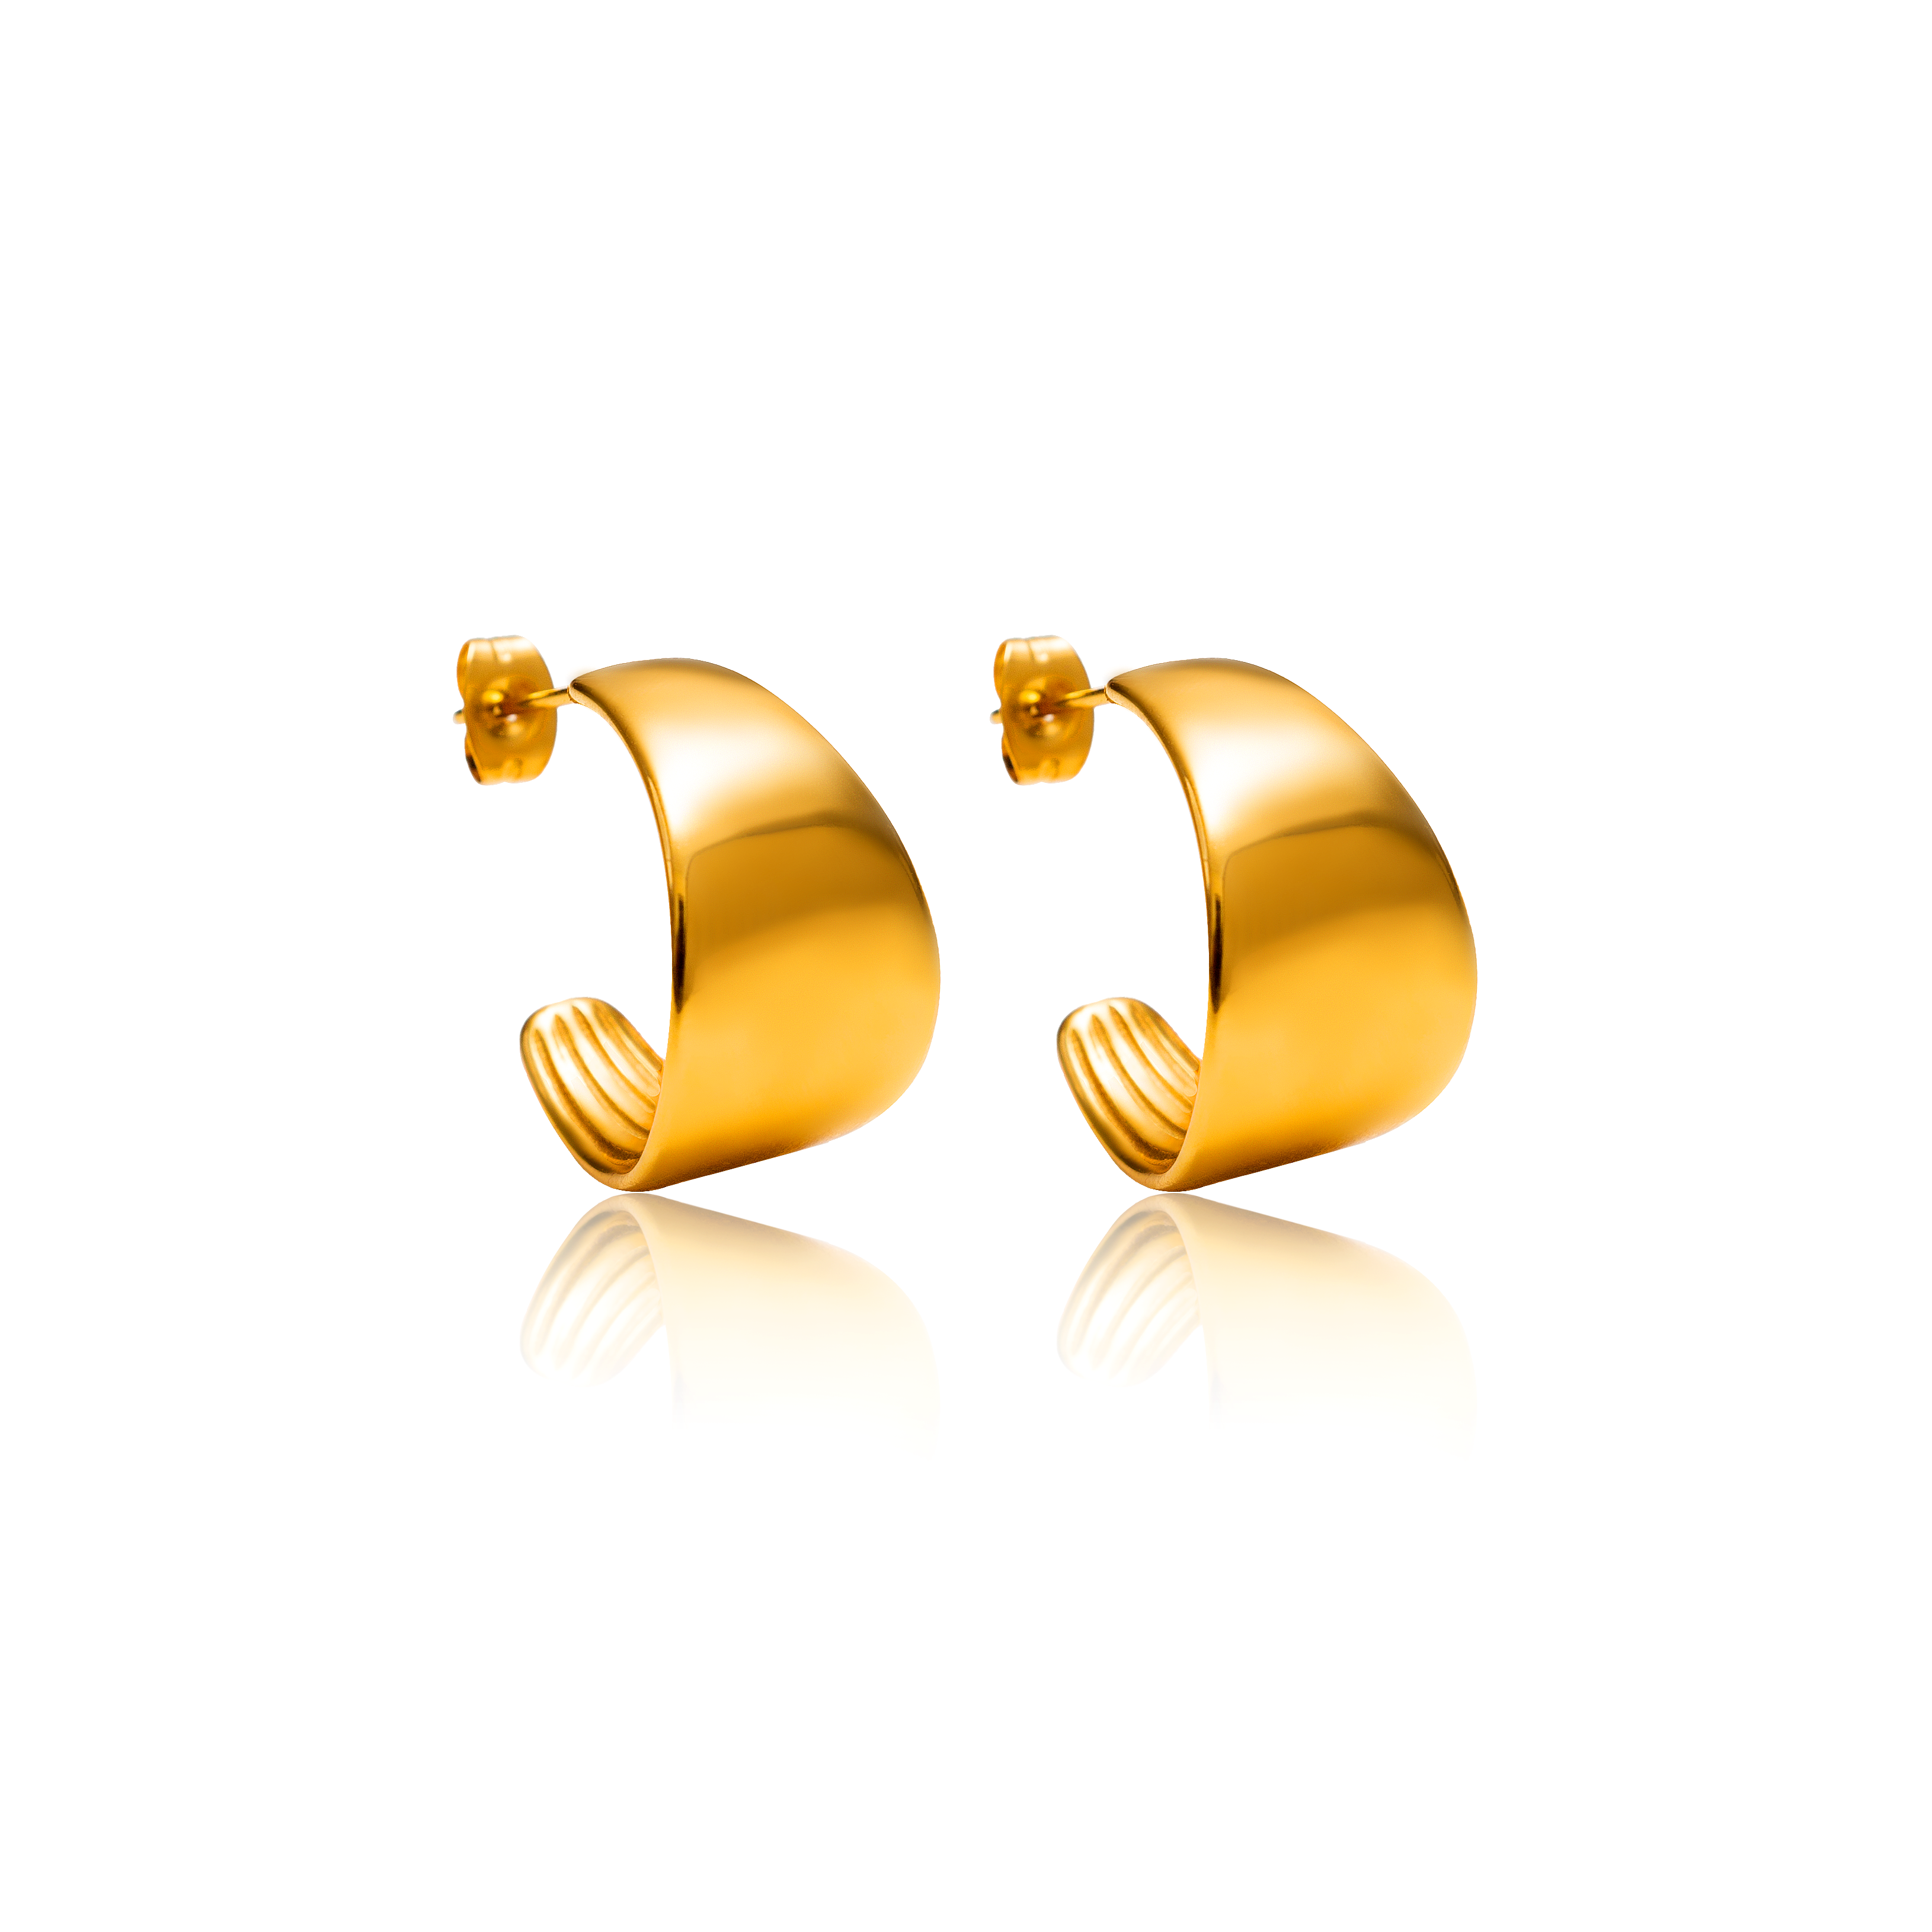 The ultimate statement-making accessory, these earrings bloom with beauty.  18k gold plated on stainless steel. Outer diameter: 22mm Width: 14mm